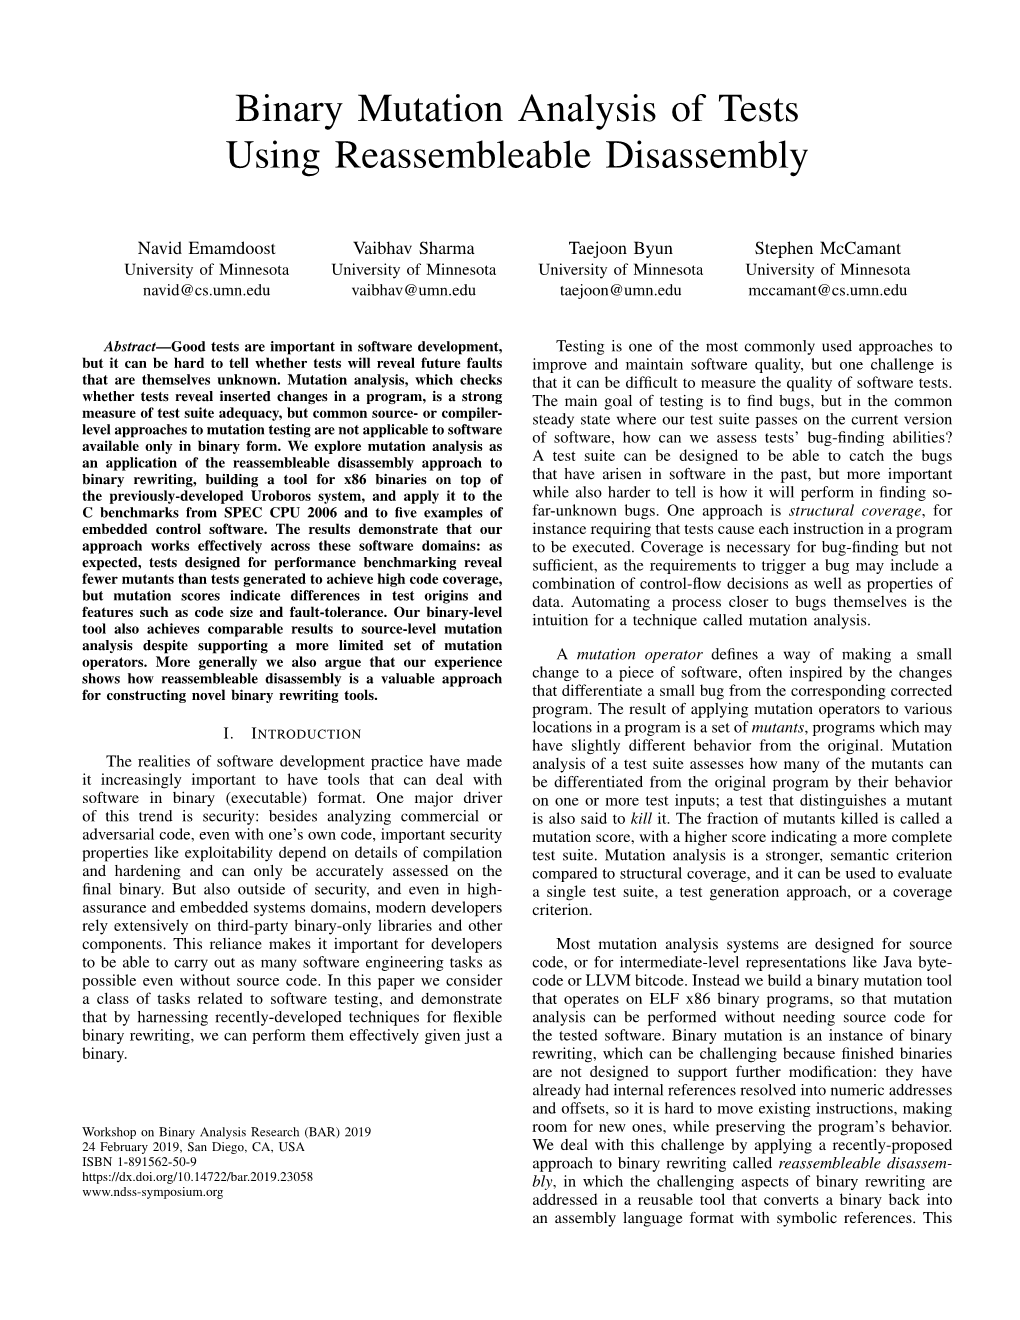 Binary Mutation Analysis of Tests Using Reassembleable Disassembly